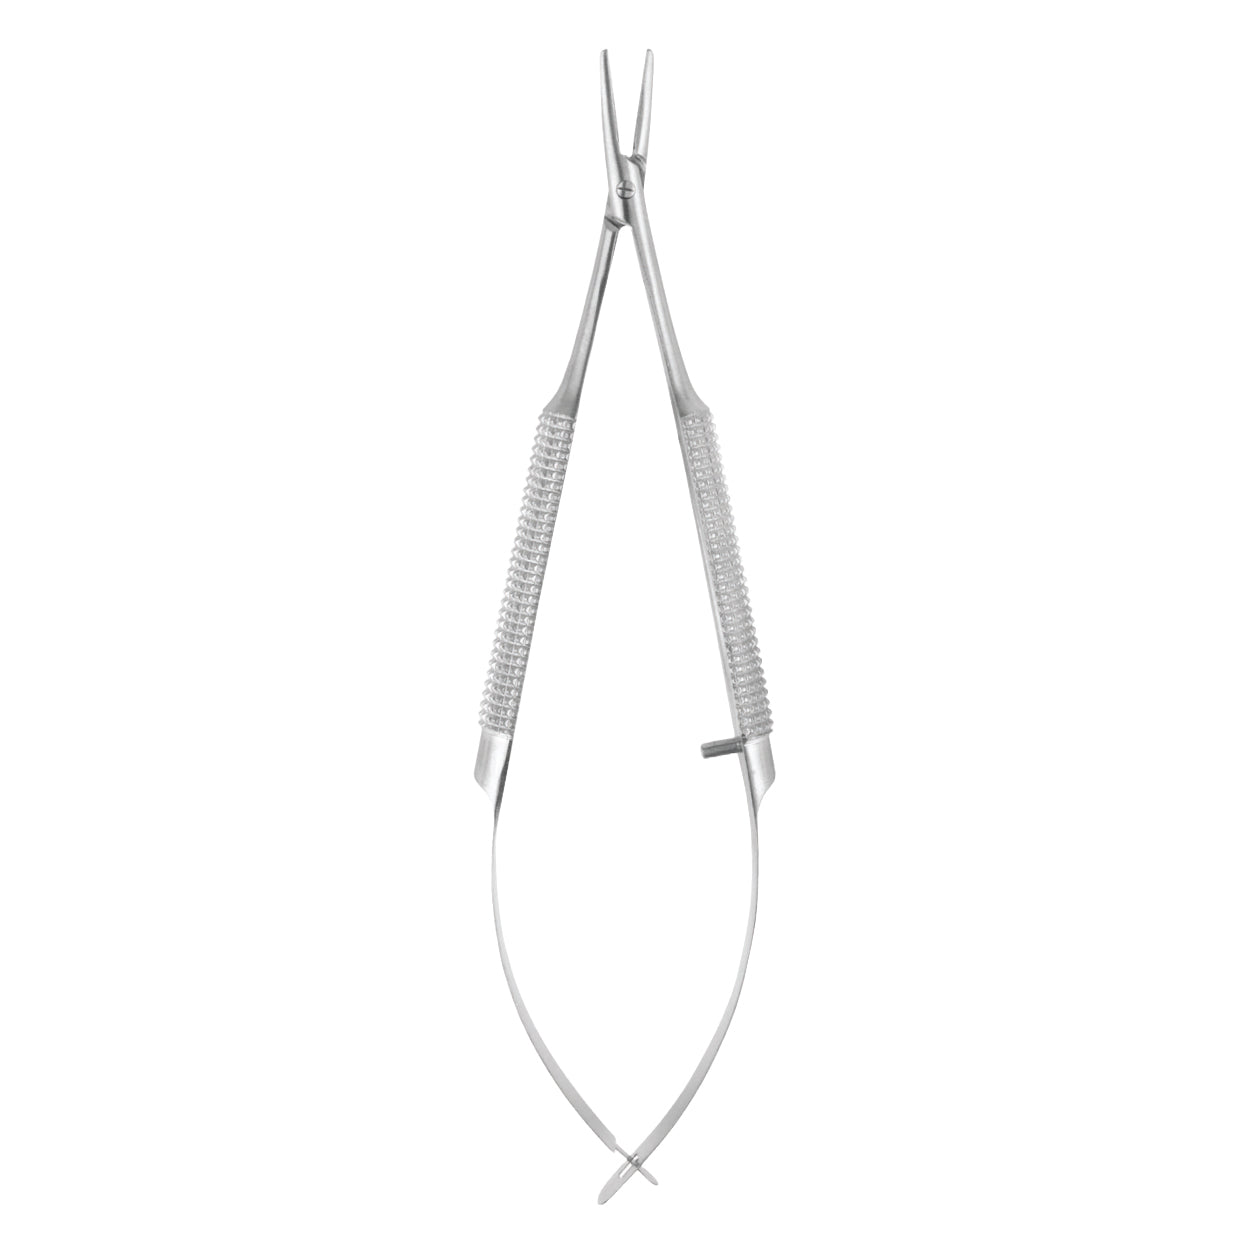 Barraquer Needle Holder, Curved, 11cm (4.30")